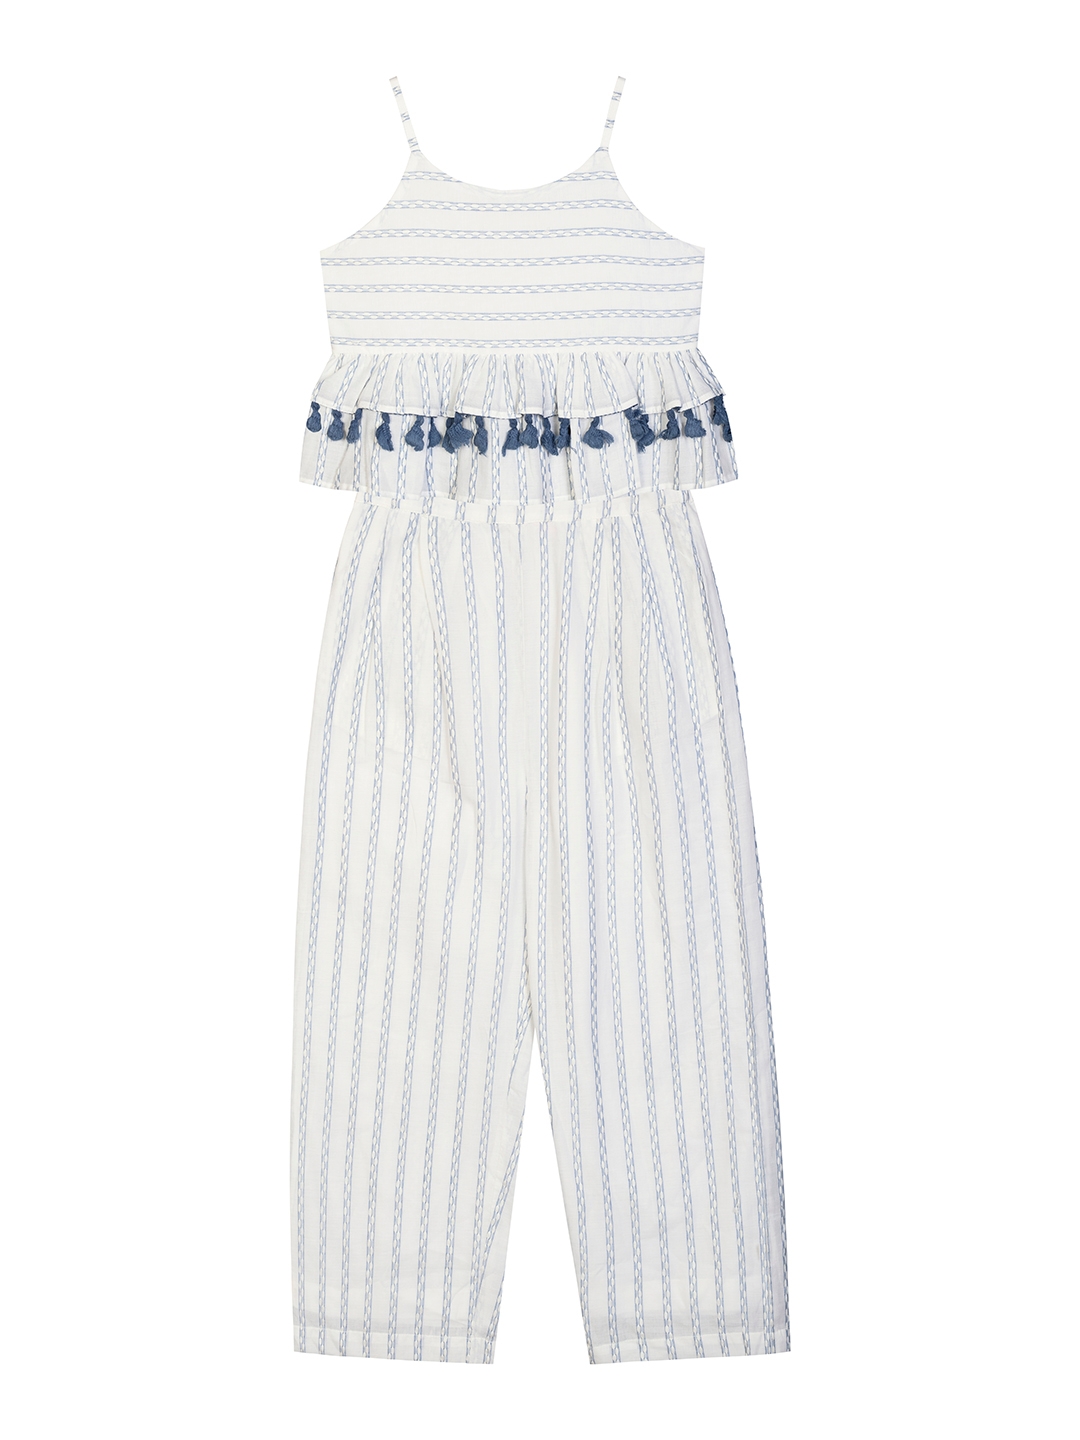 Budding Bees | Budding Bees Girls Striped Tassels Lace Top-Pant Set